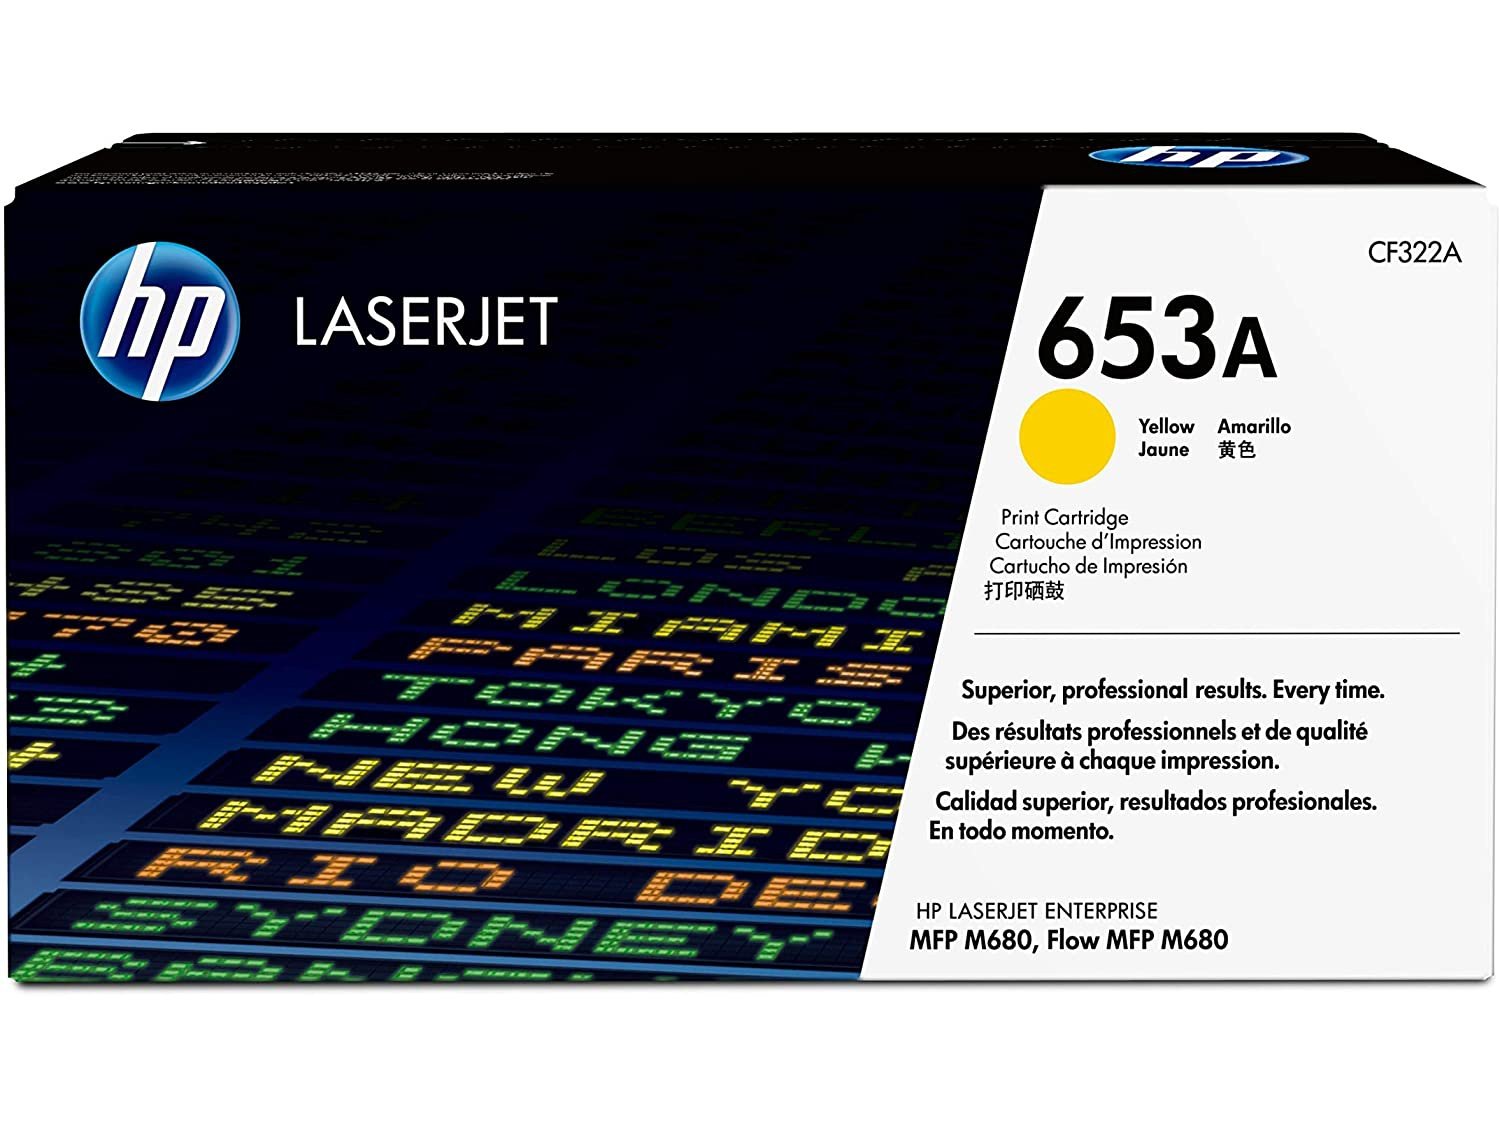 ICU Compatible/ OEM Get HP ICUCF322A Yields 16500 Pages Compatible CF322A Toner Cartridge Yellow - 653A